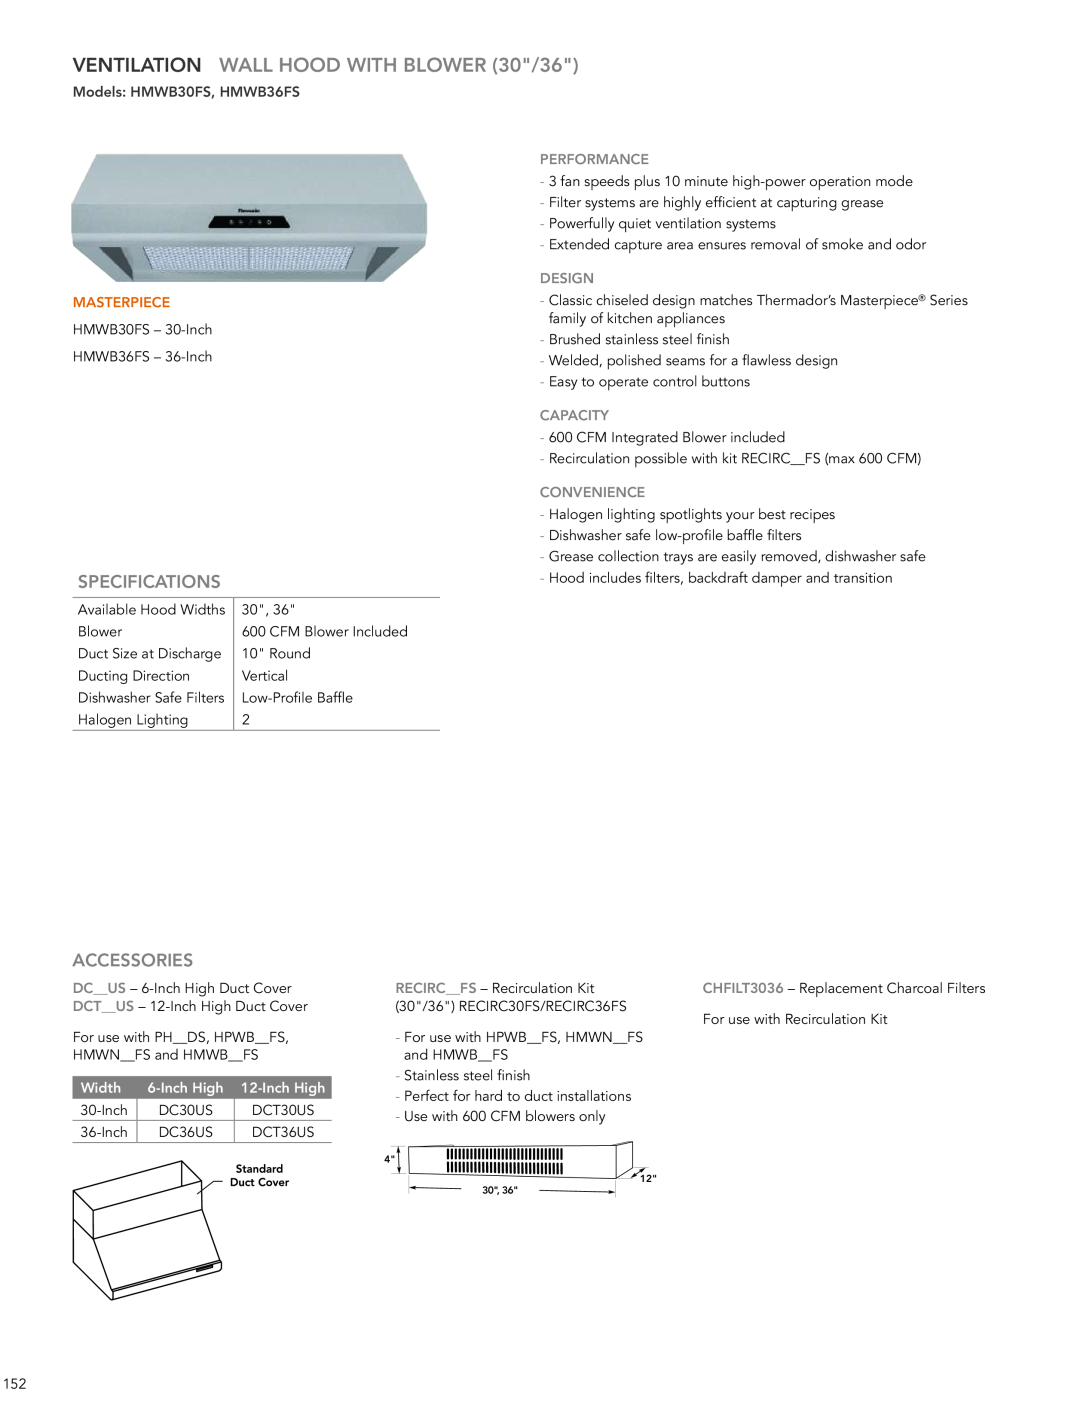 Thermador HMWB36FS VENTILATION WALL HOOD WITH BLOWER 30/36, models HmWB30FS, HmWB36FS, Specifications, Accessories, DESIgN 